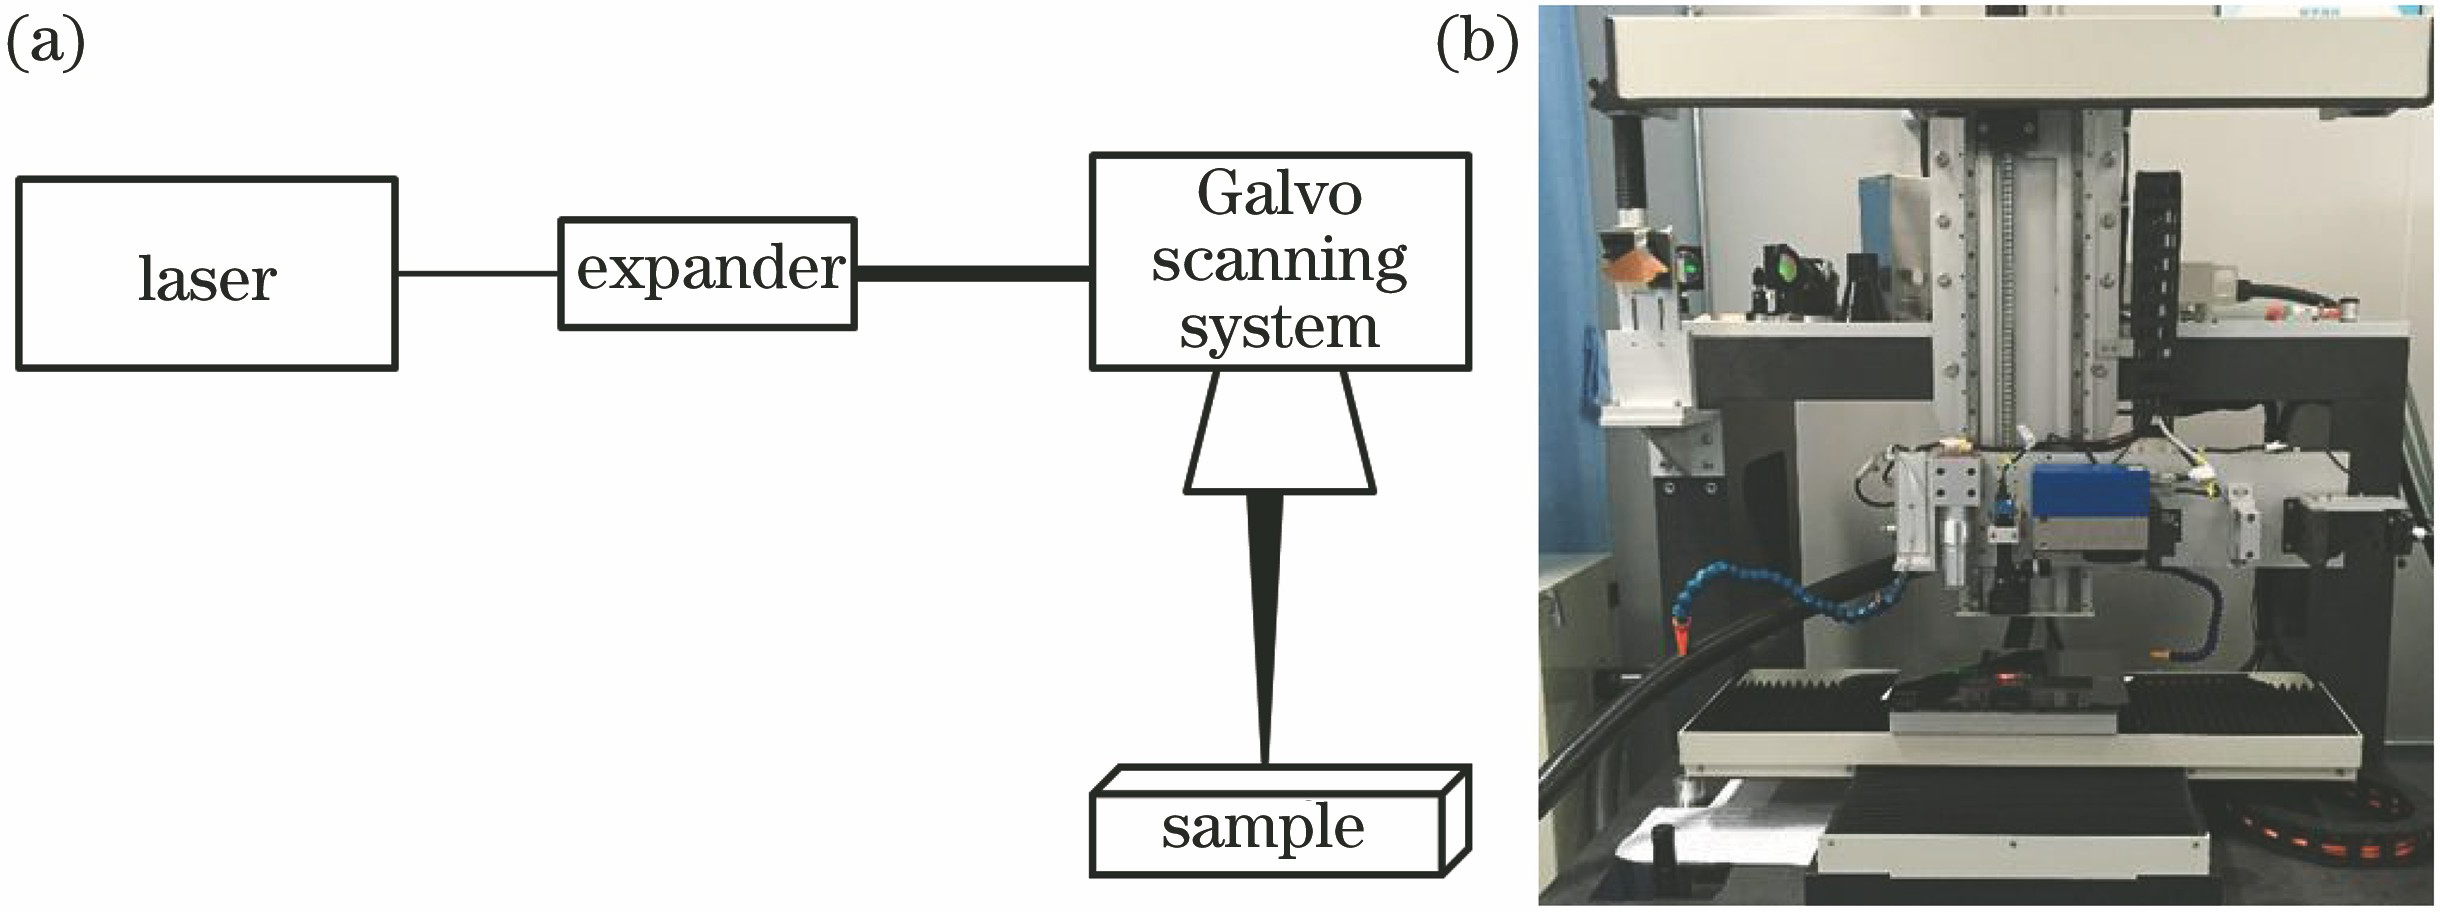 Schematic and photo of experimental setup. (a) Schematic; (b) photo